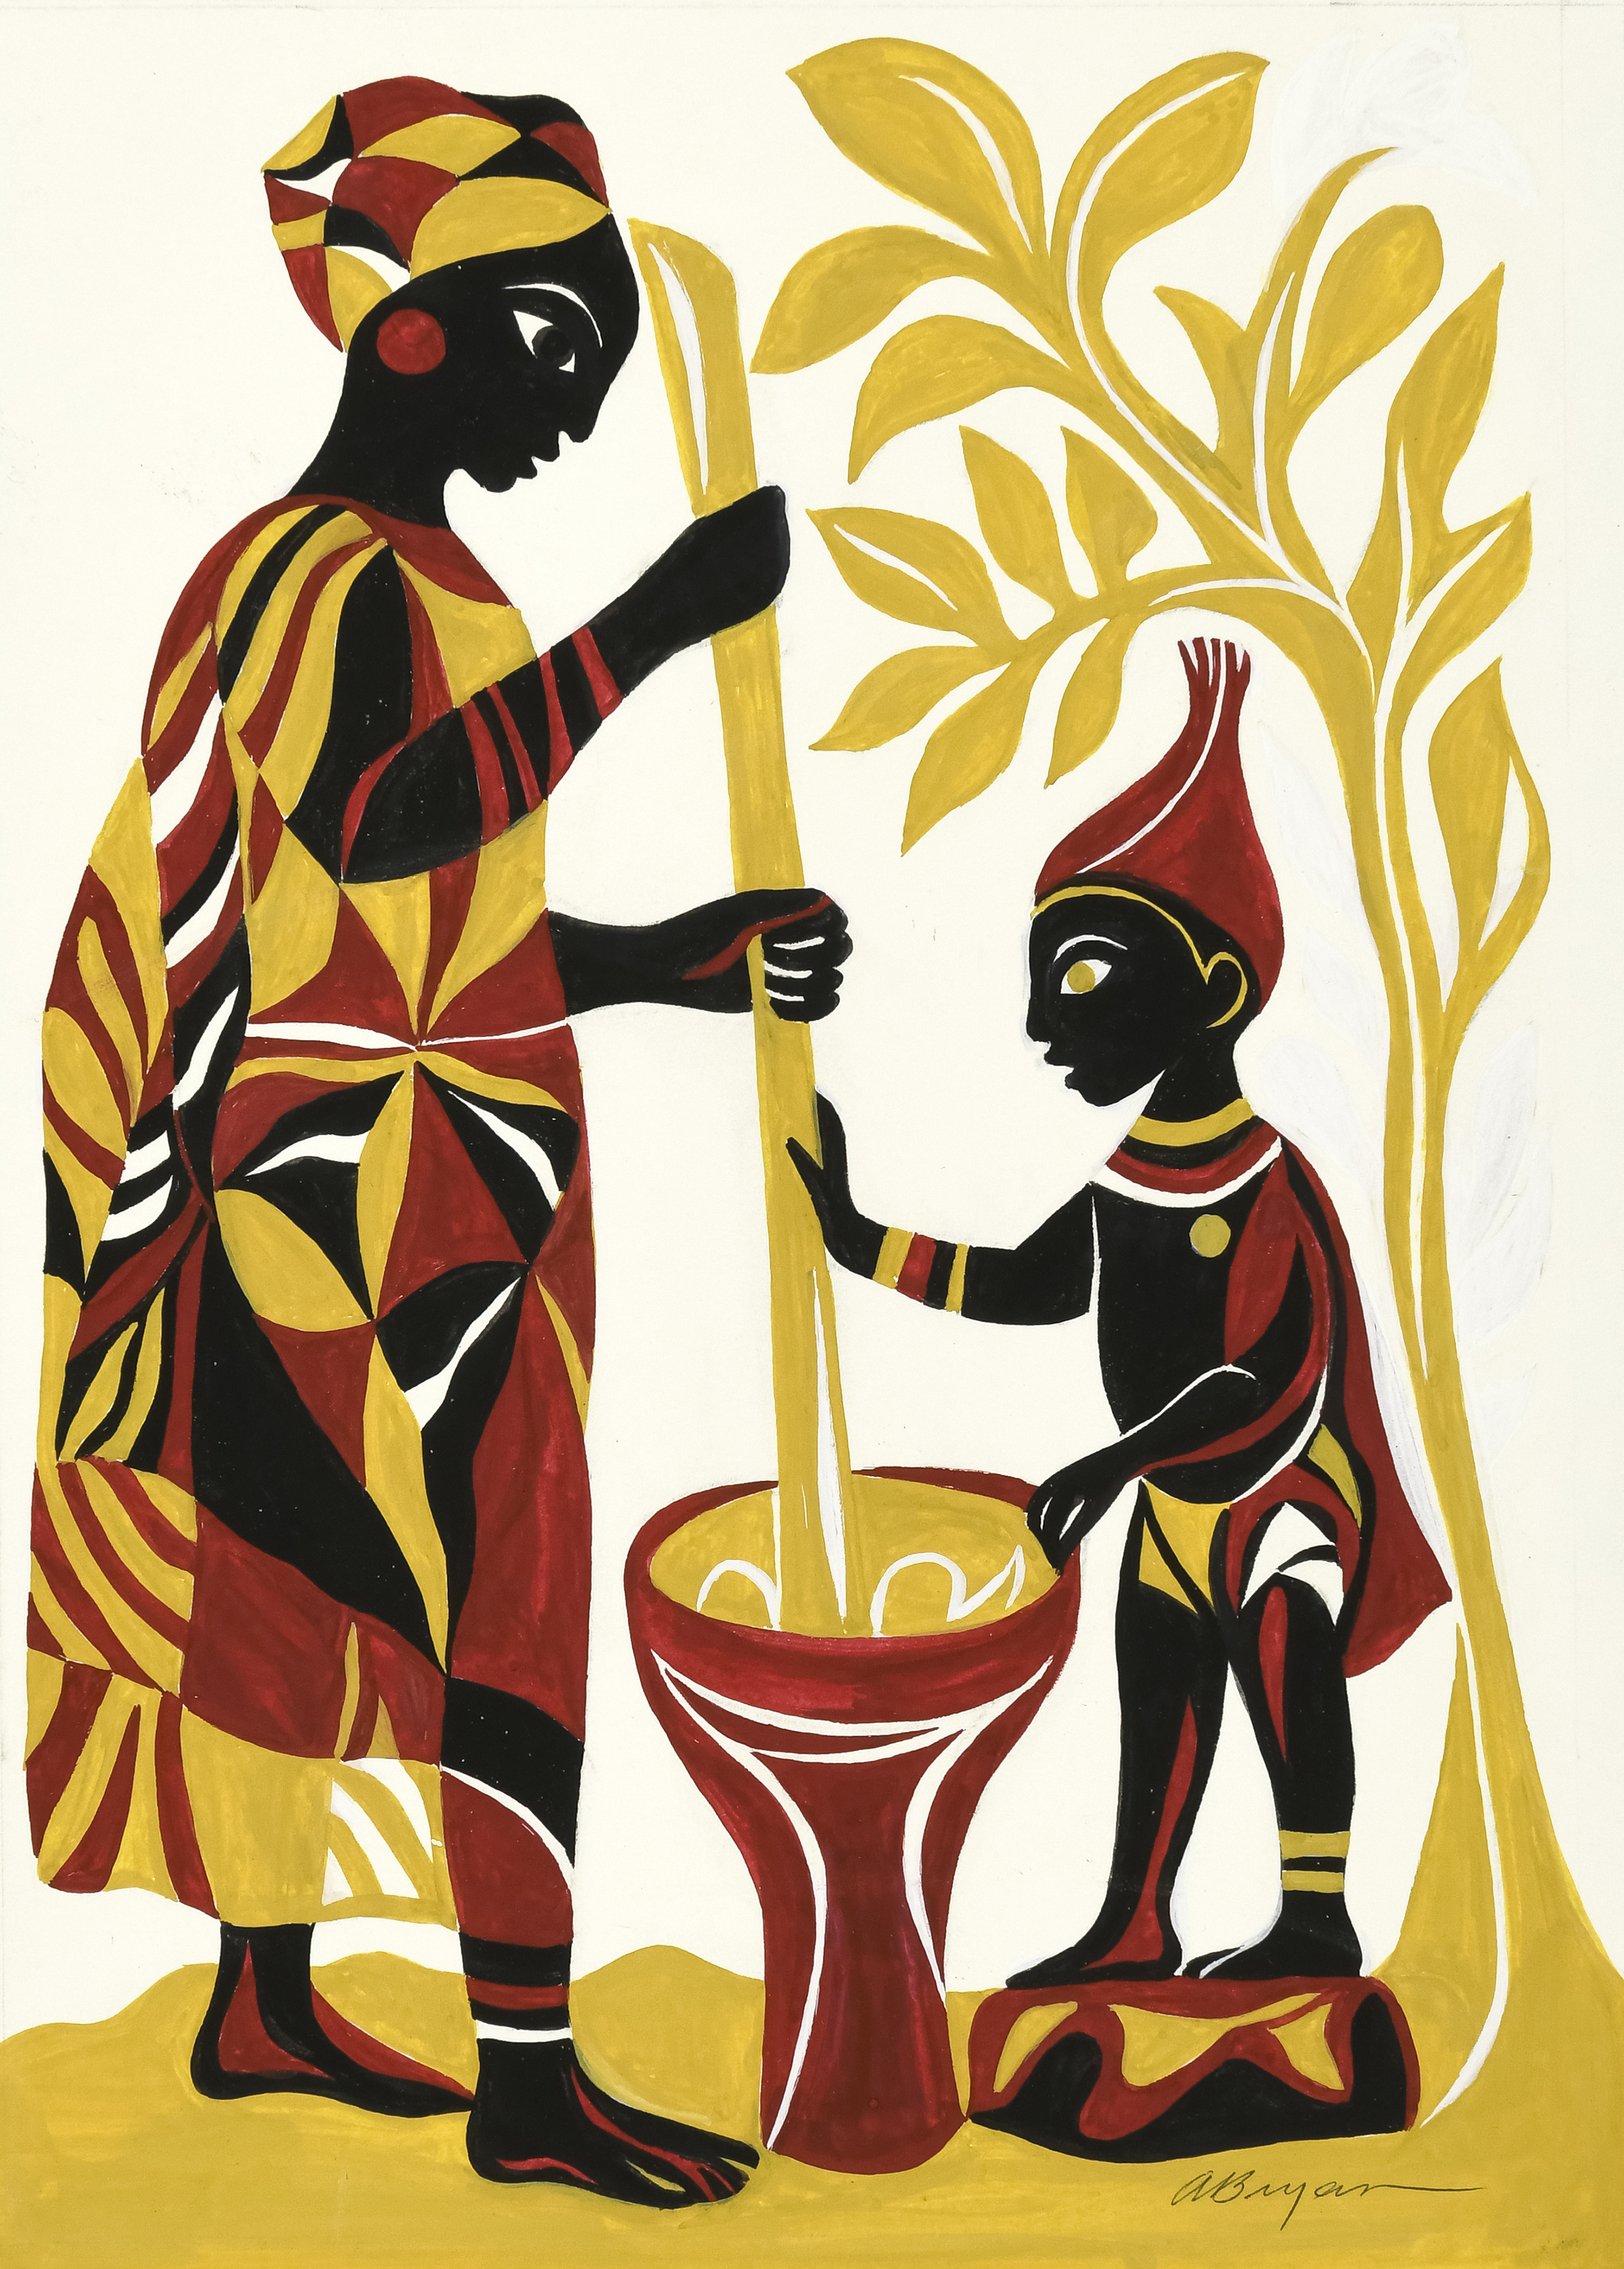 Illustration of two people using mortar and pestle. 